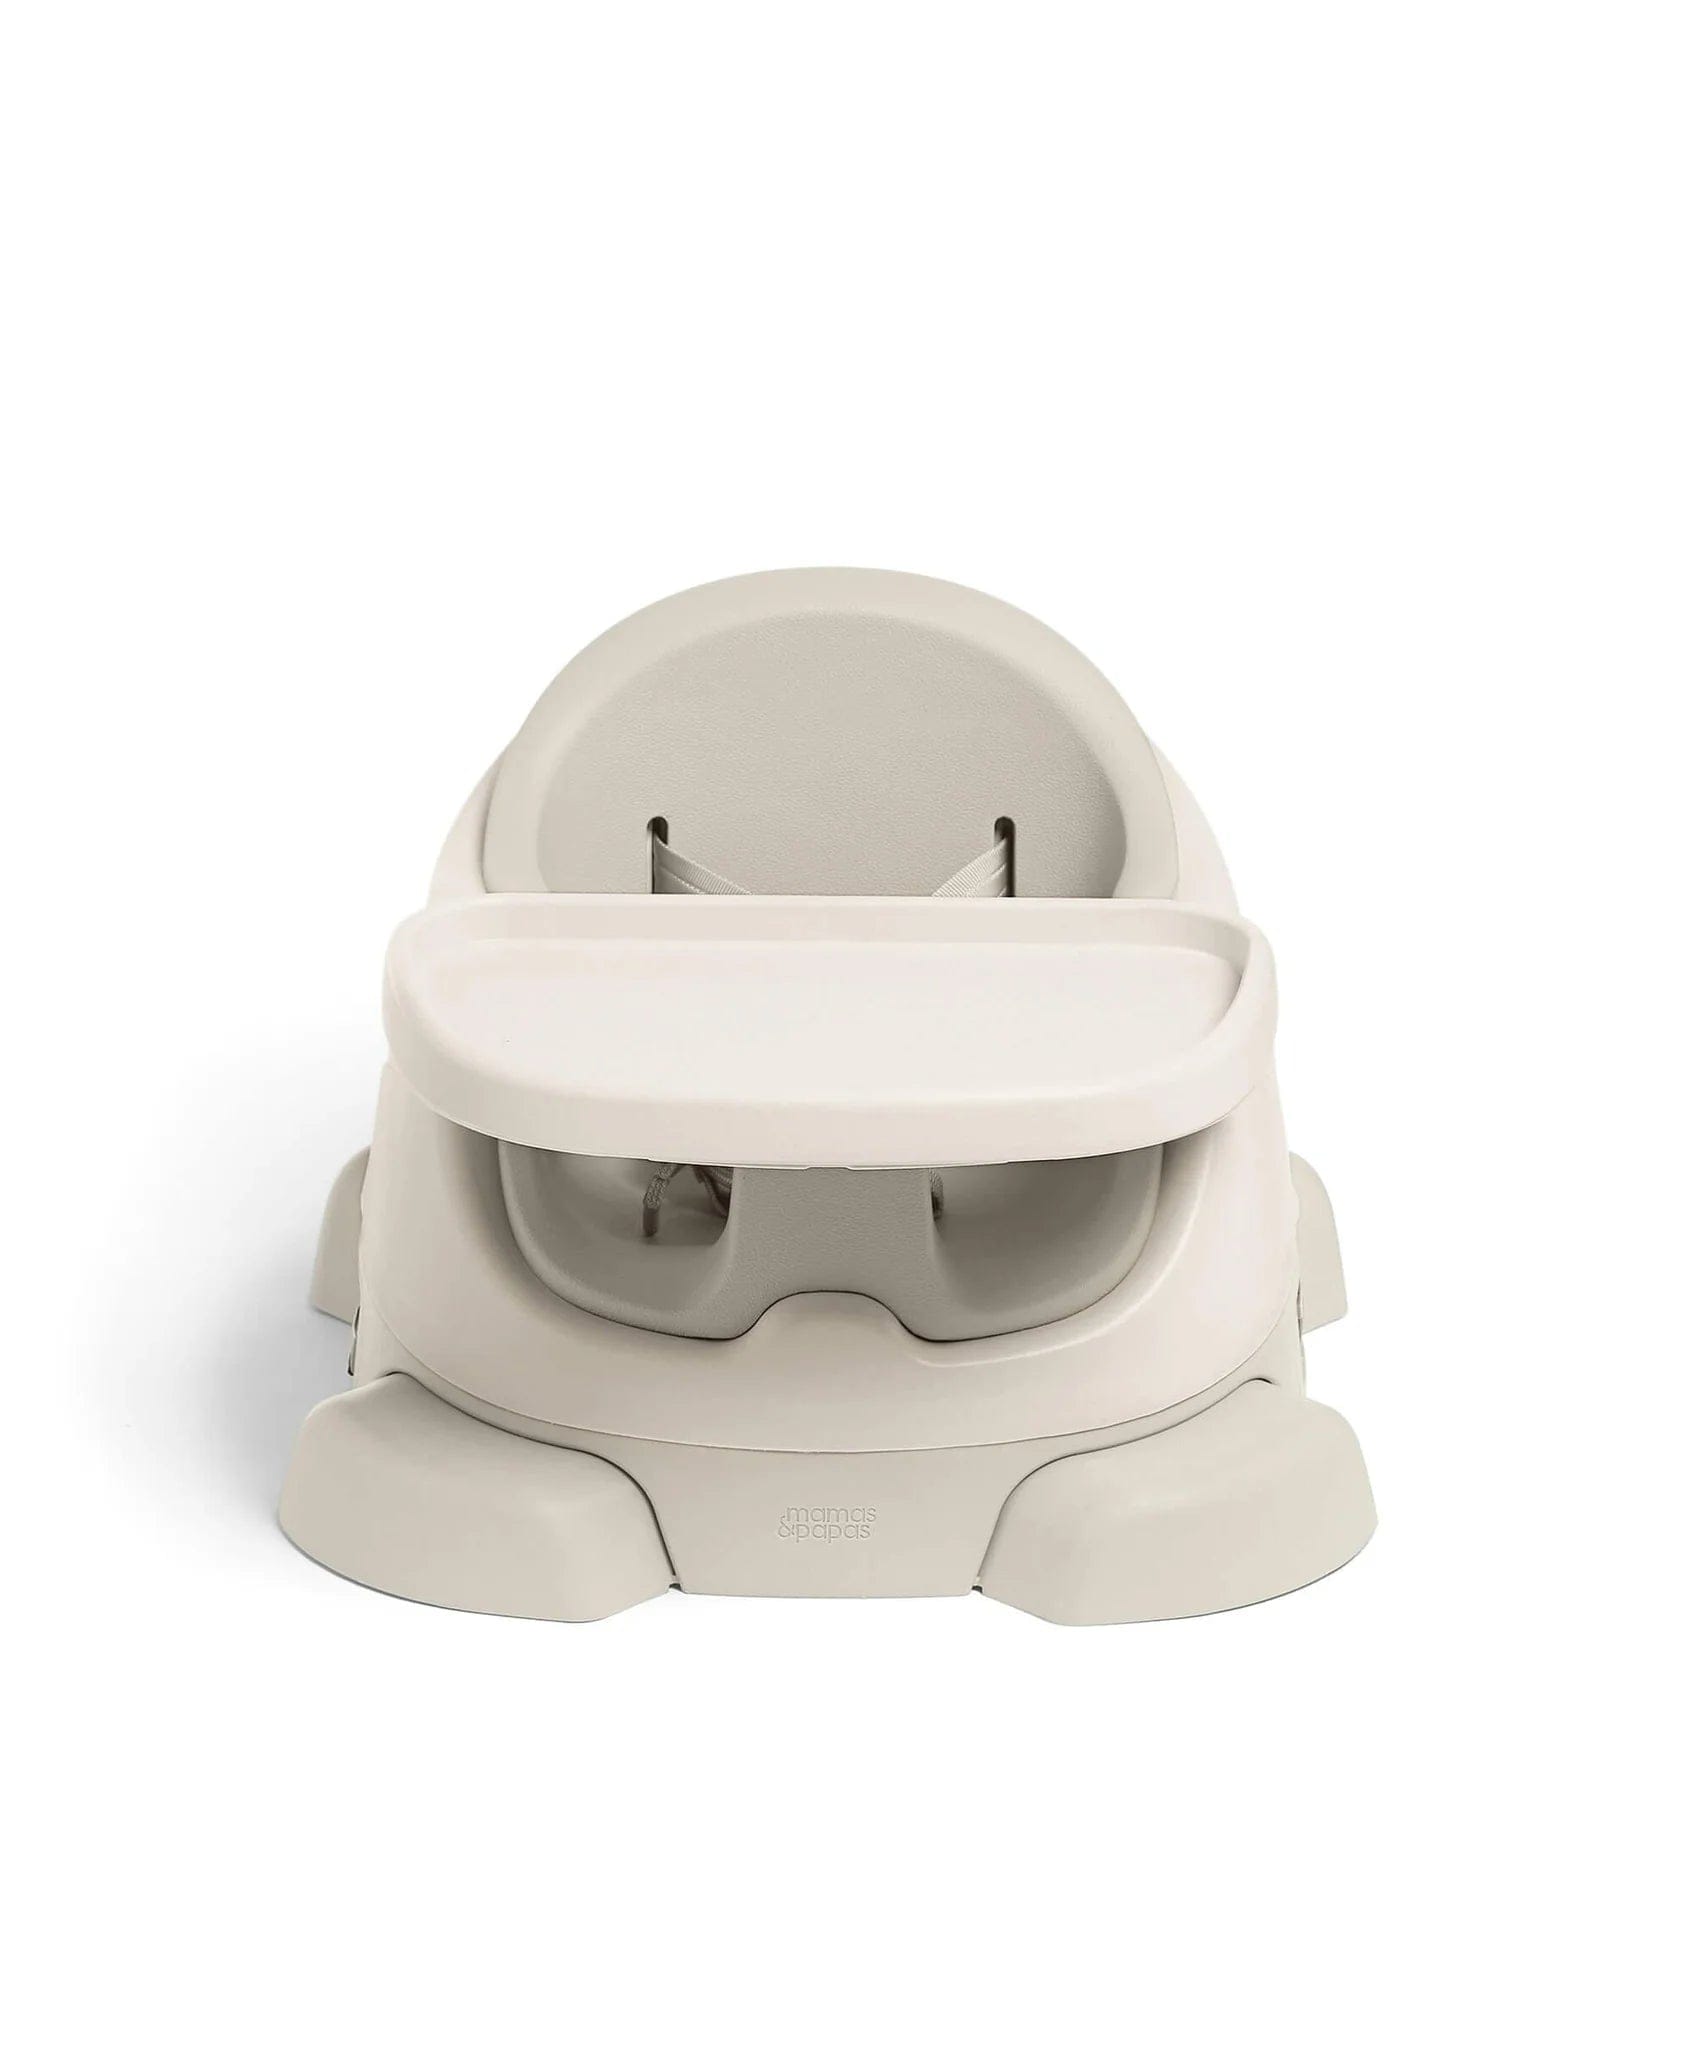 Mamas & Papas Bug 3-in-1 Floor & Booster Seat with Activity Tray in Clay Activity Toys 98681CL00 5063229033285